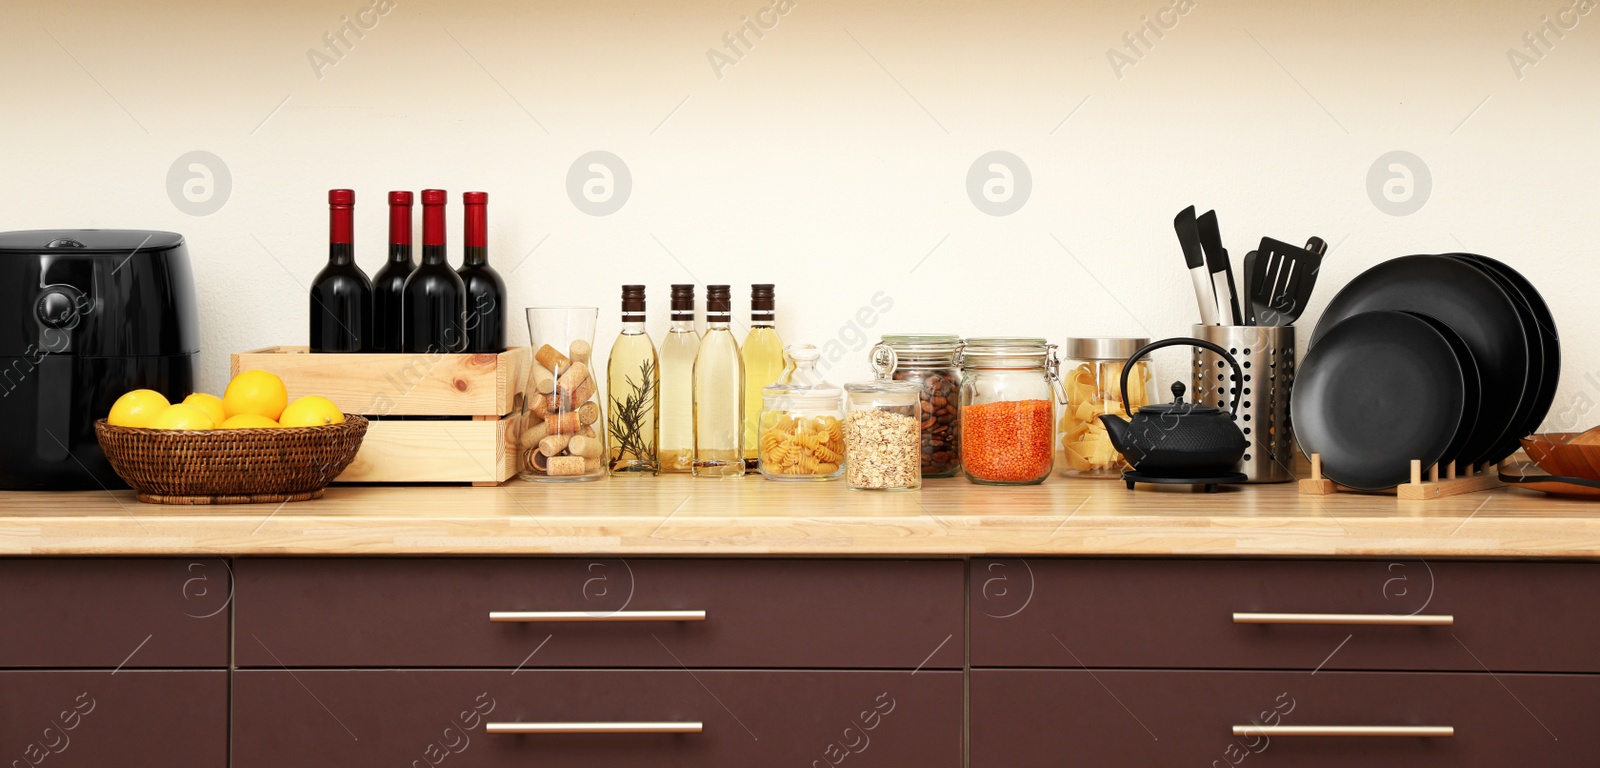 Photo of Wooden countertop with dishware and products near white wall. Kitchen interior idea